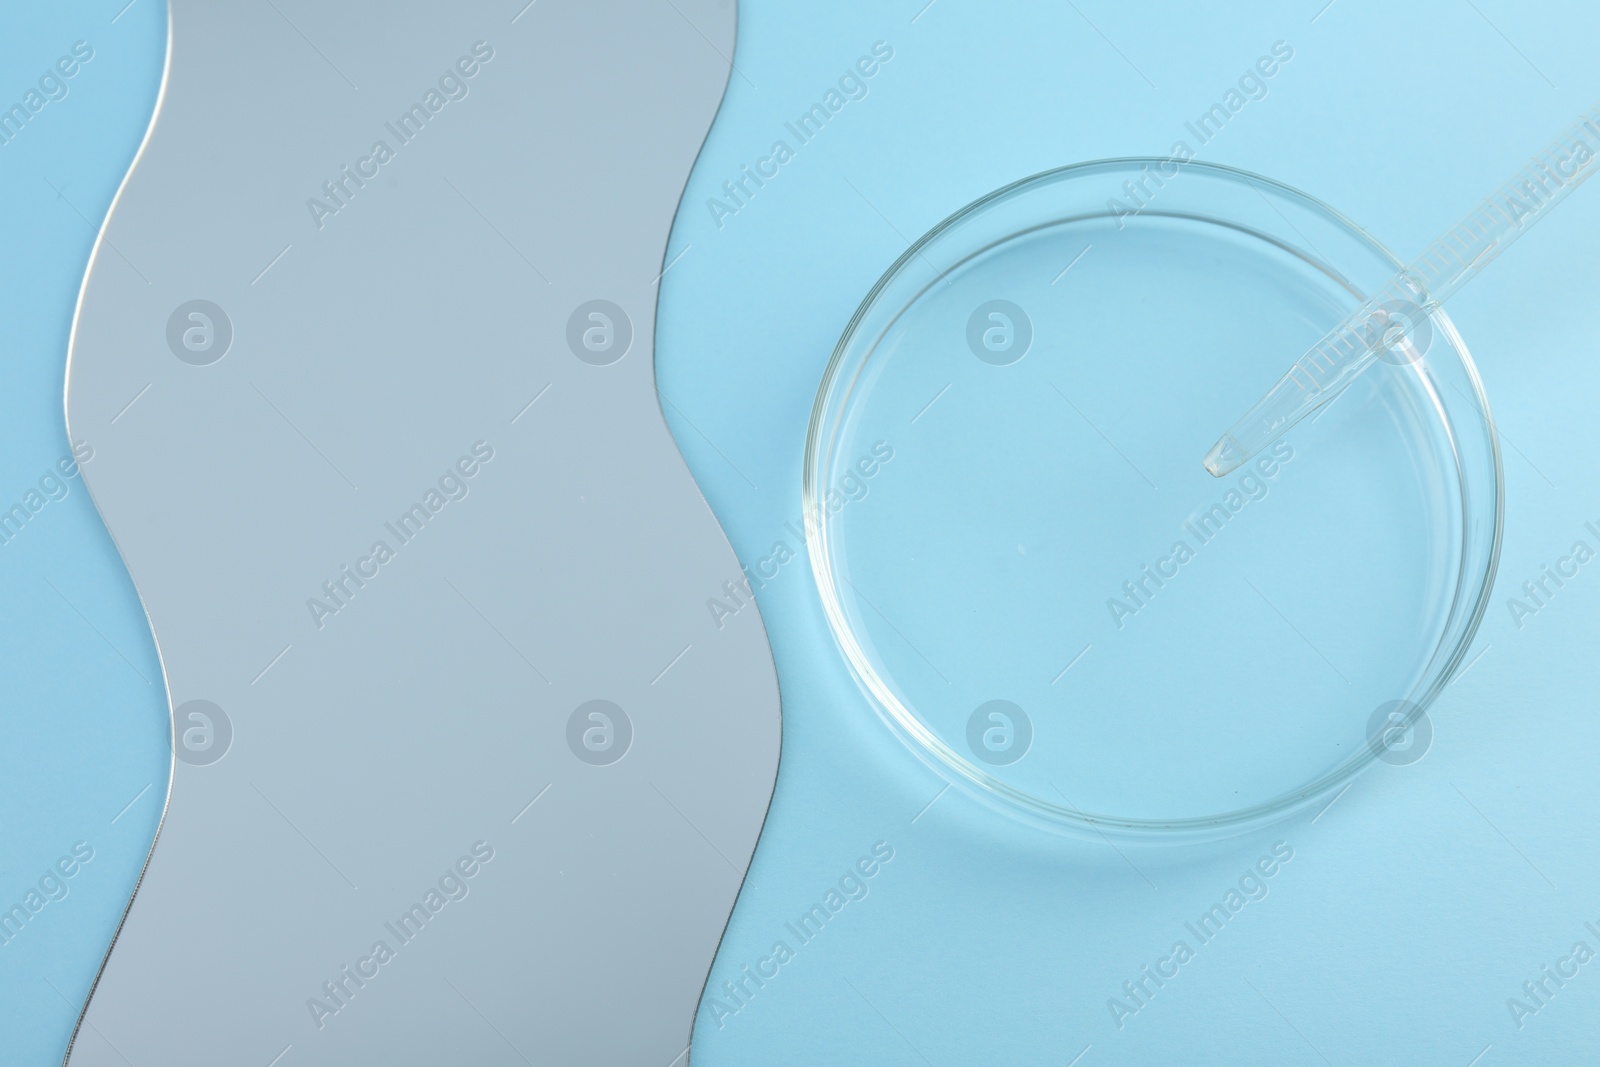 Photo of Empty petri dish, pipette and mirror on light blue background, flat lay